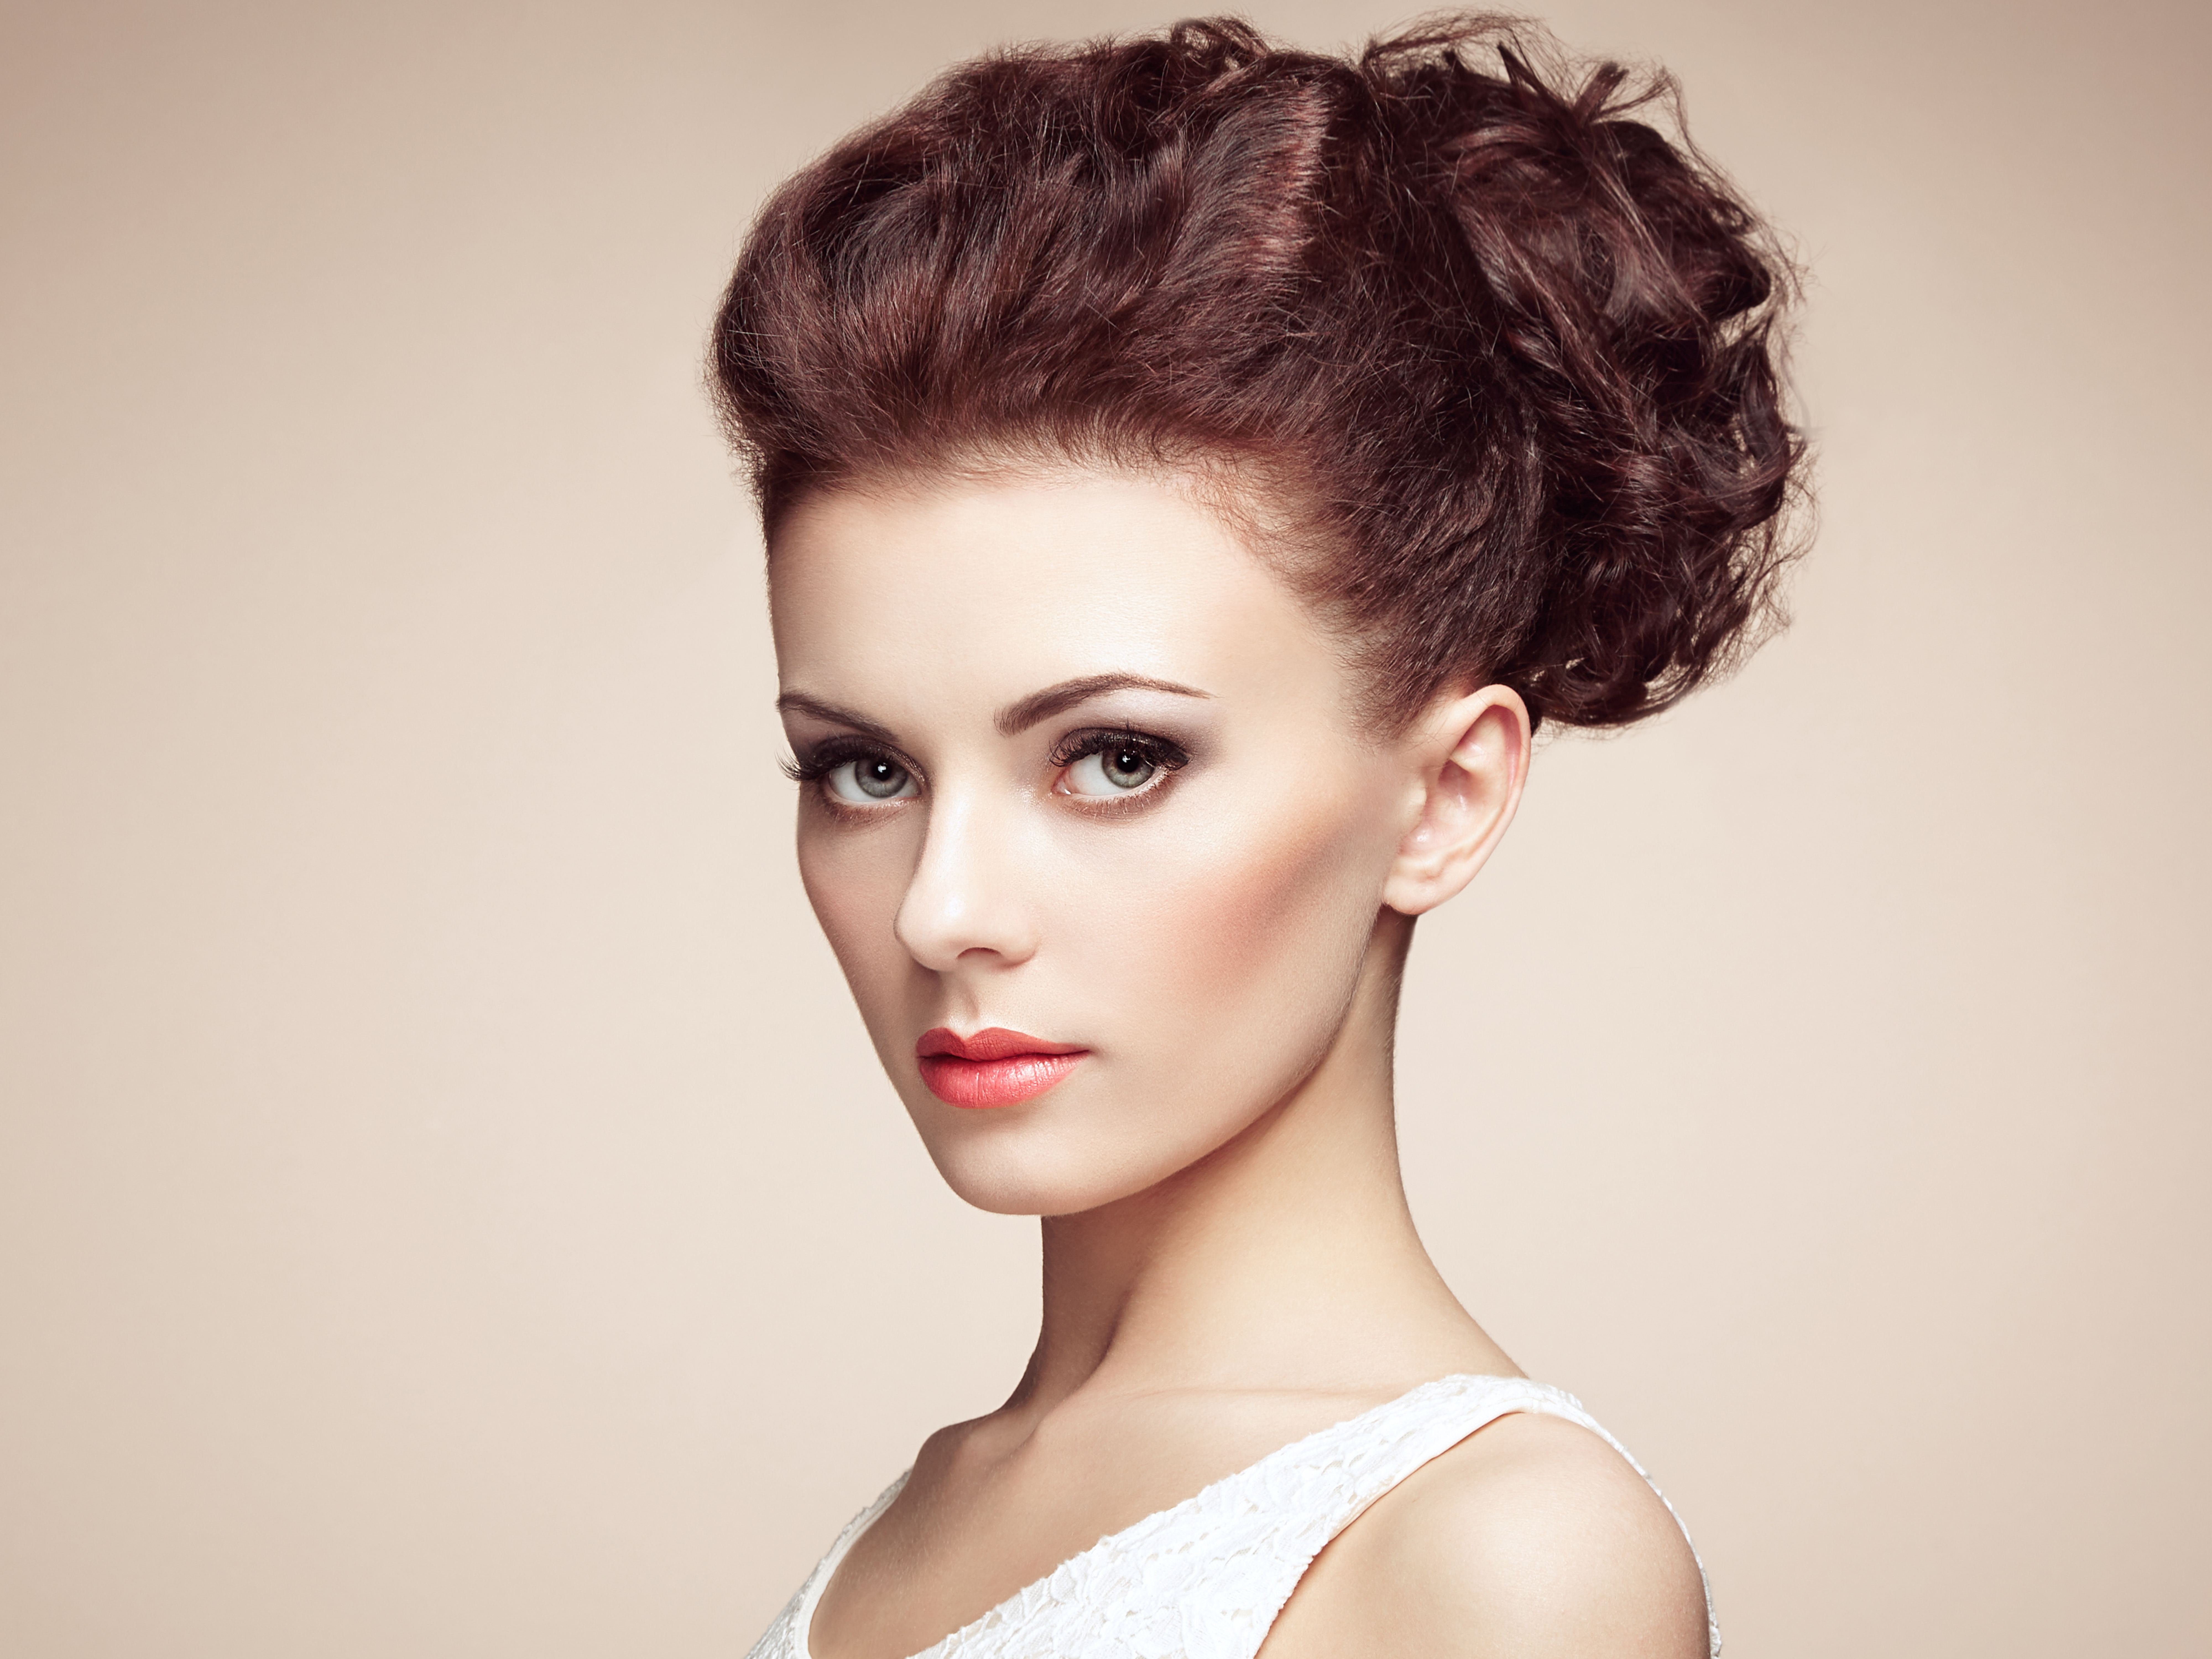 Portrait of beautiful sensual woman with elegant hairstyle 8k Ultra ...